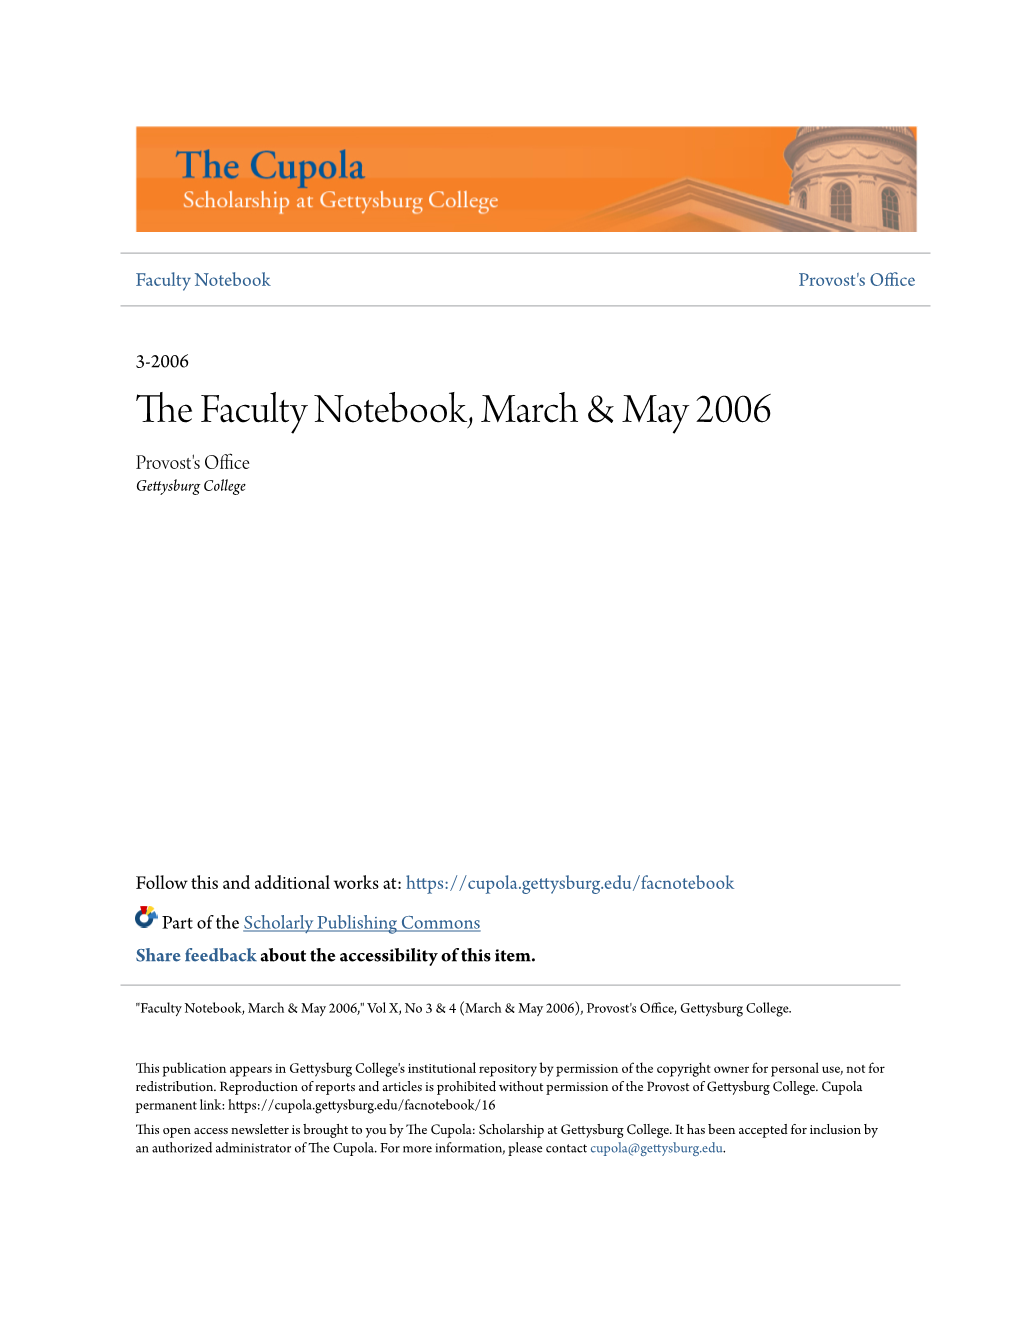 The Faculty Notebook, March & May 2006